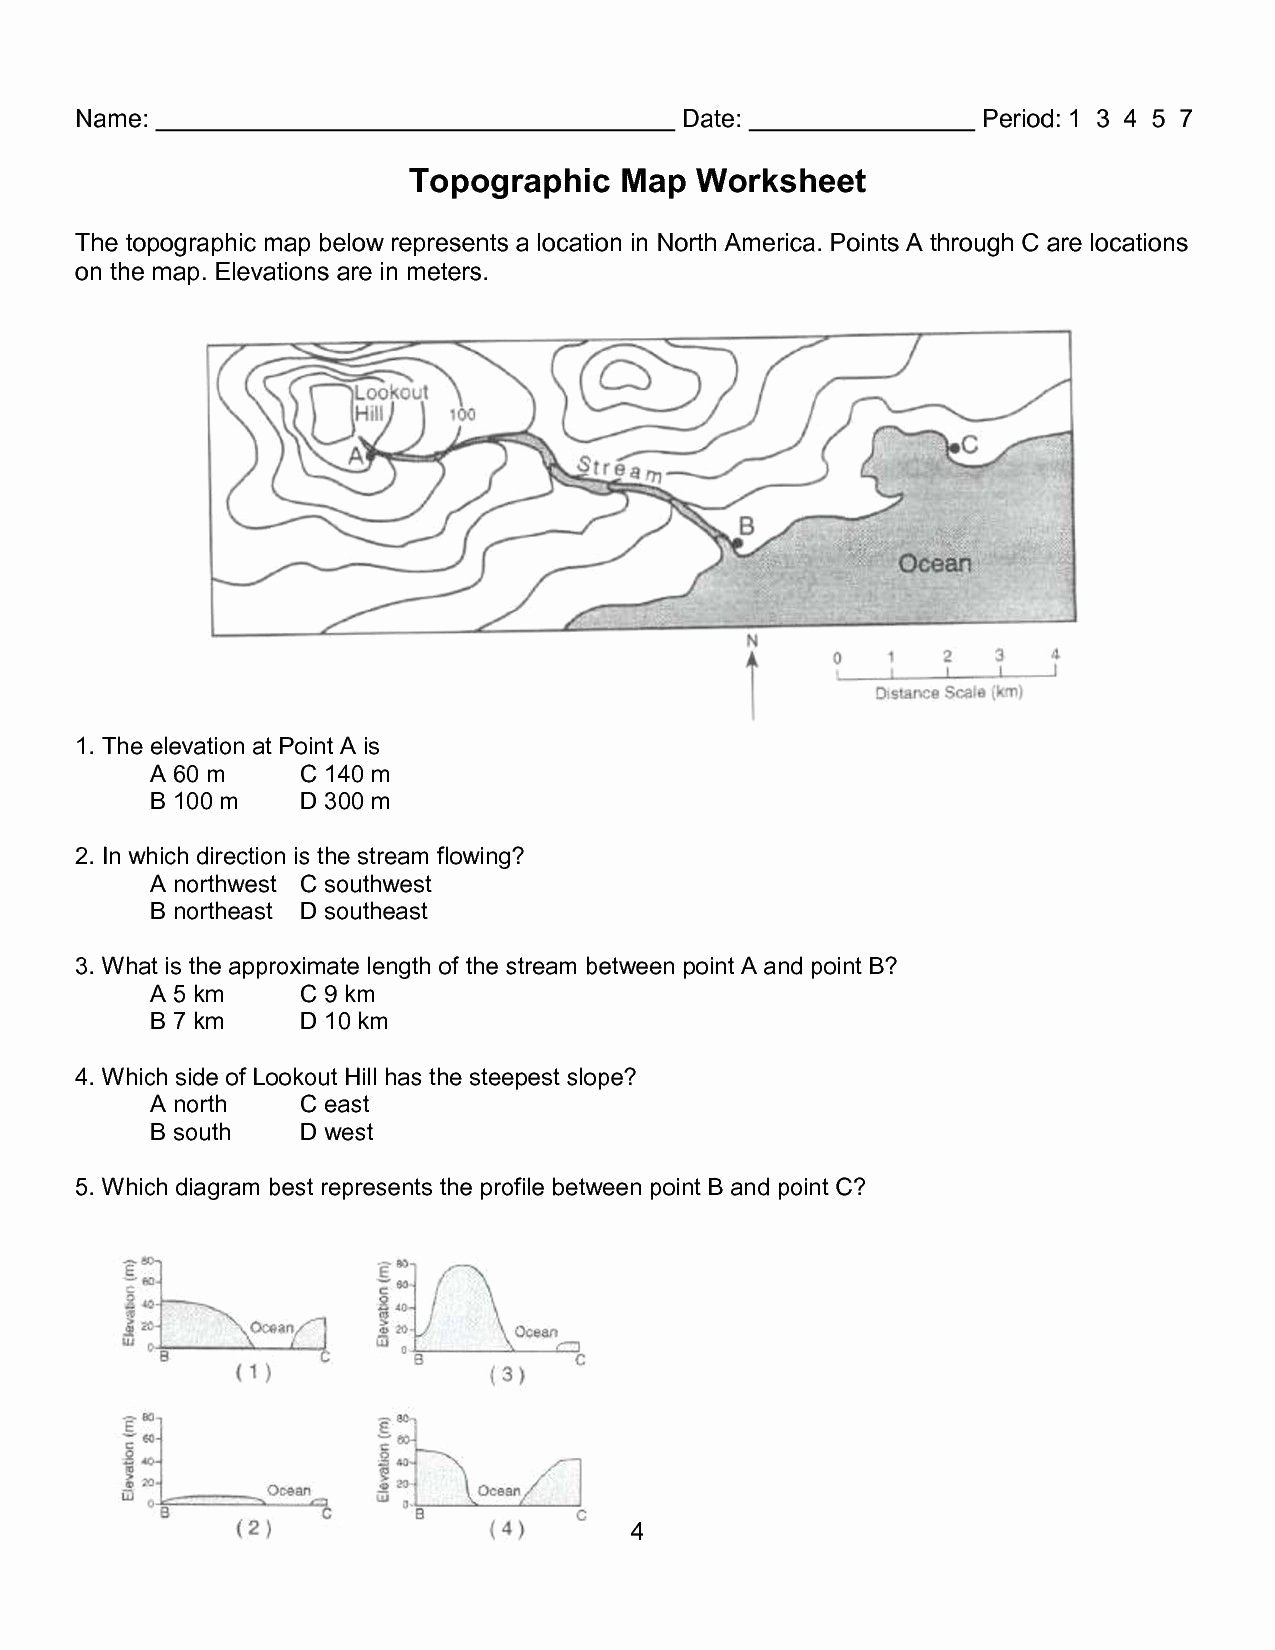 Topographic Map Worksheet Answer Key Awesome topographic Map Worksheet Answer Key